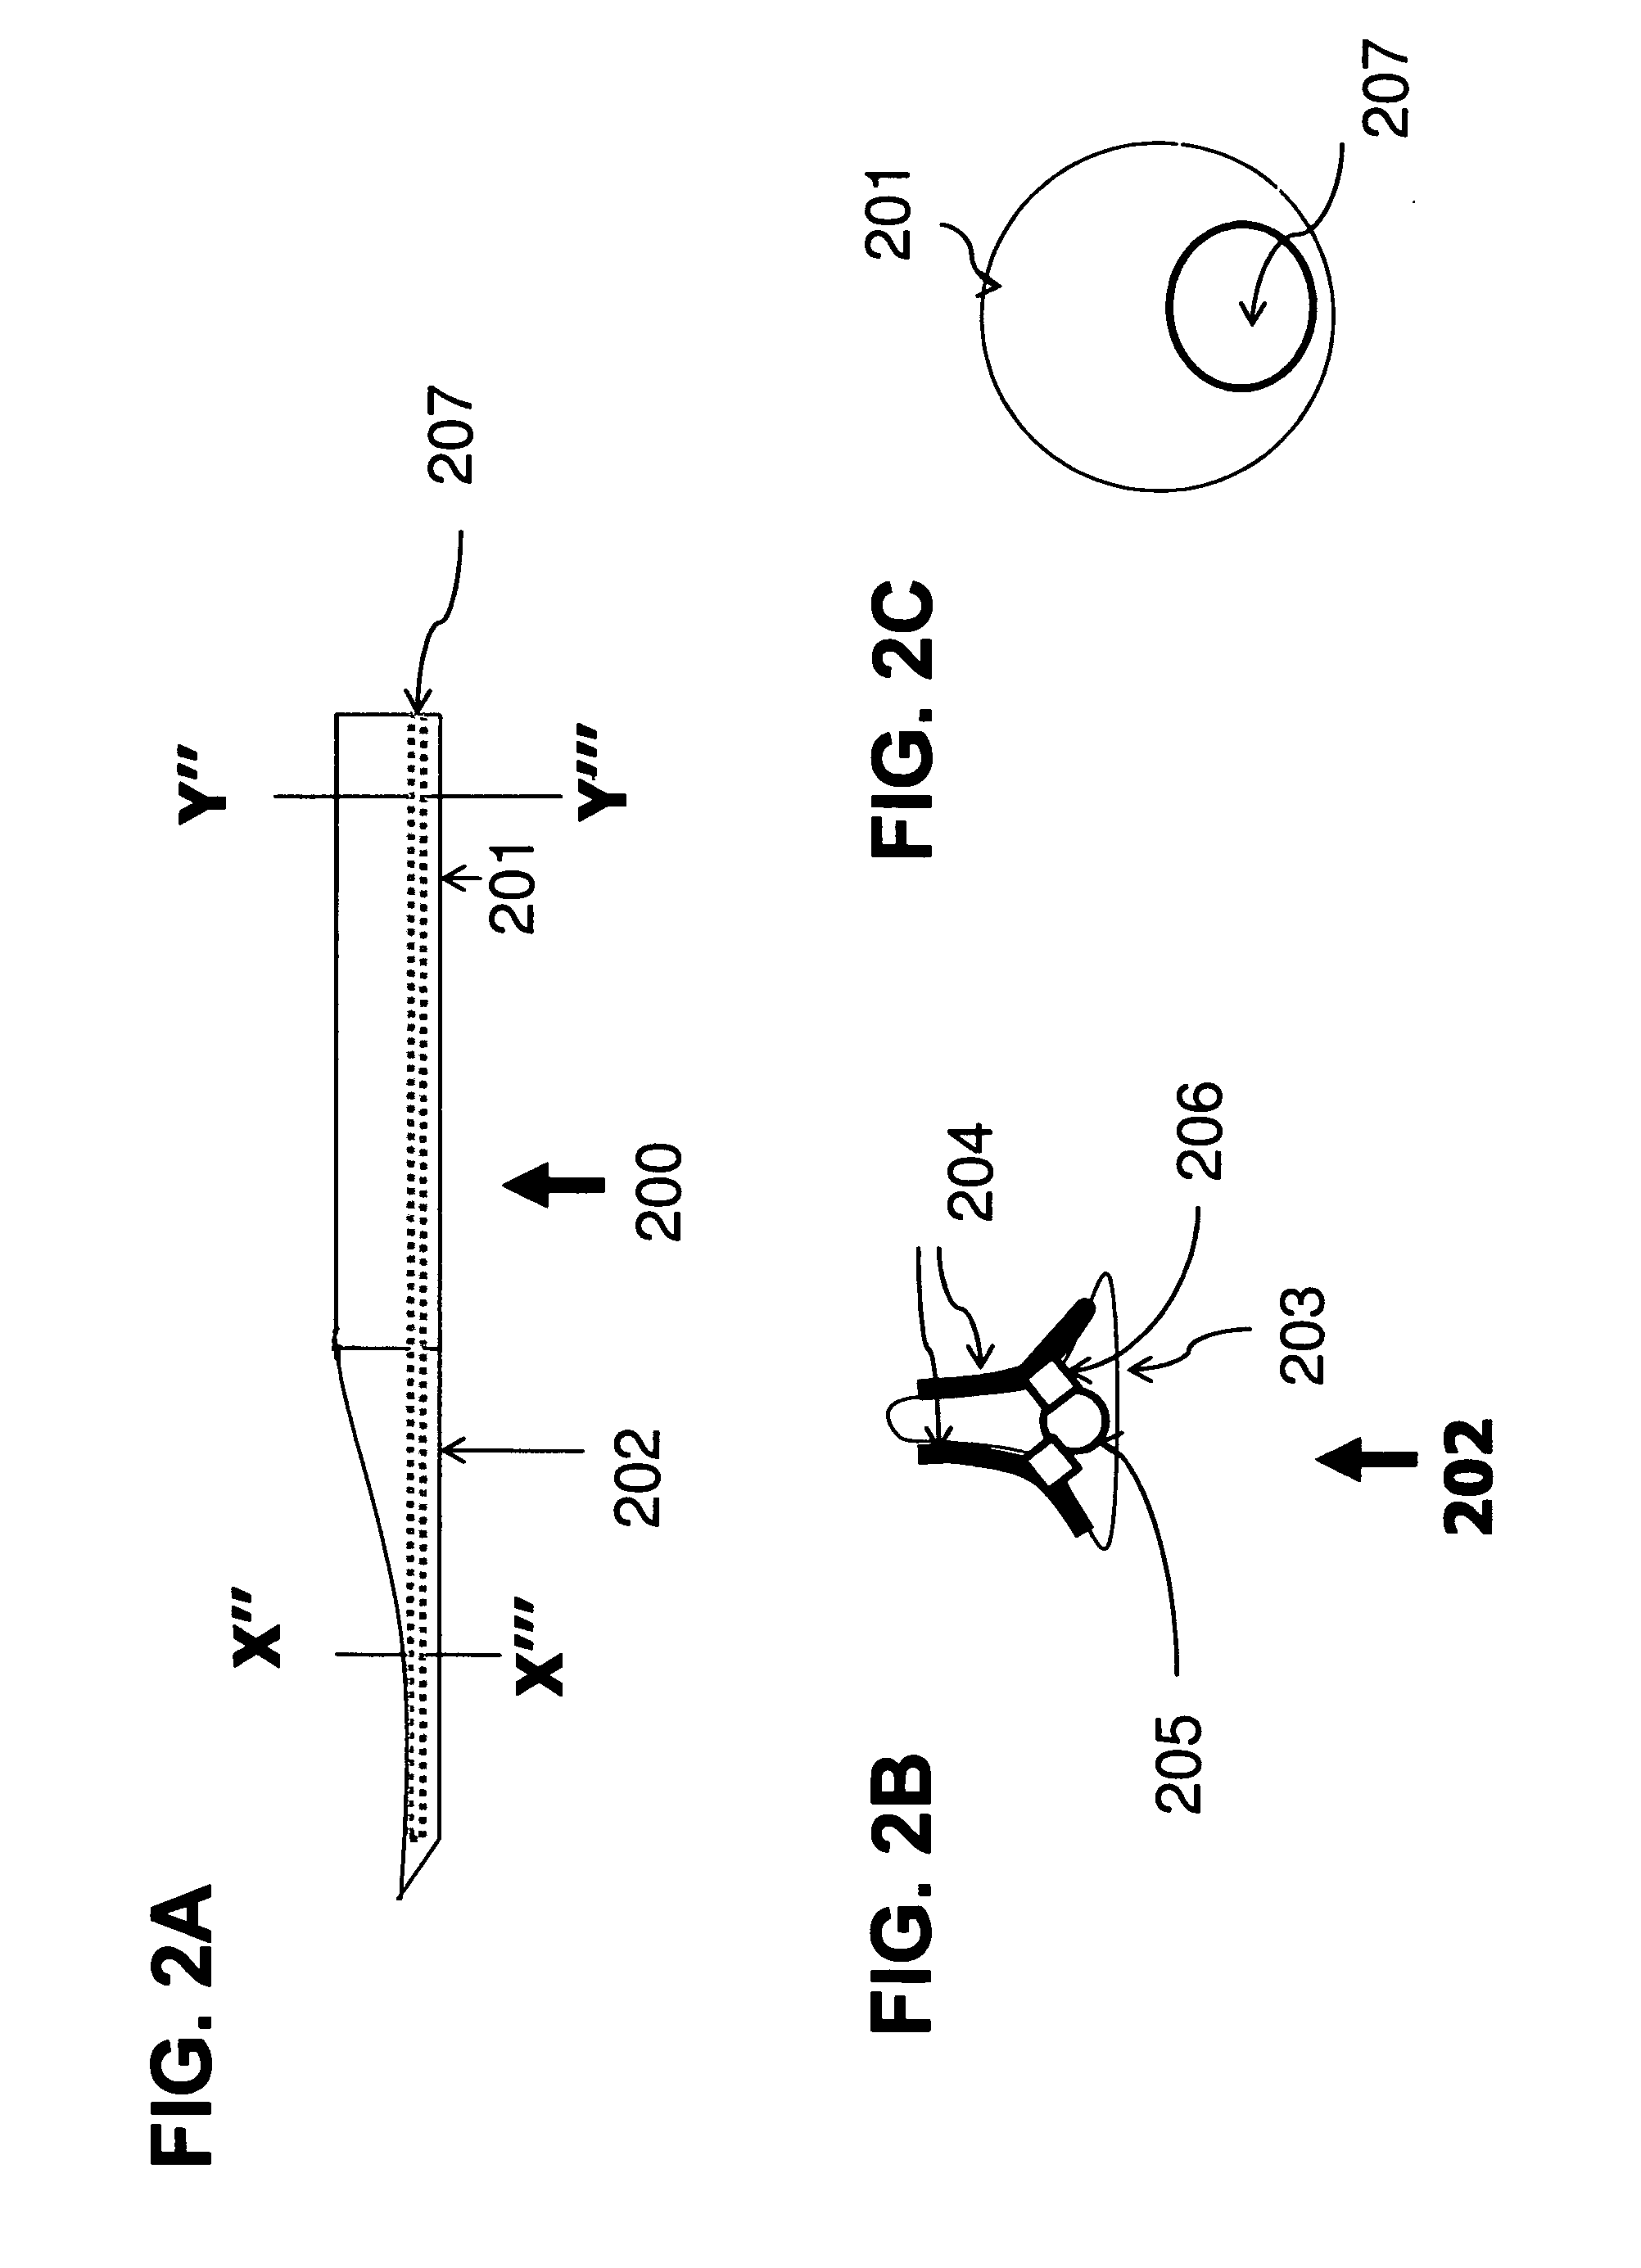 Devices and methods for improved interdental cleaning and therapy